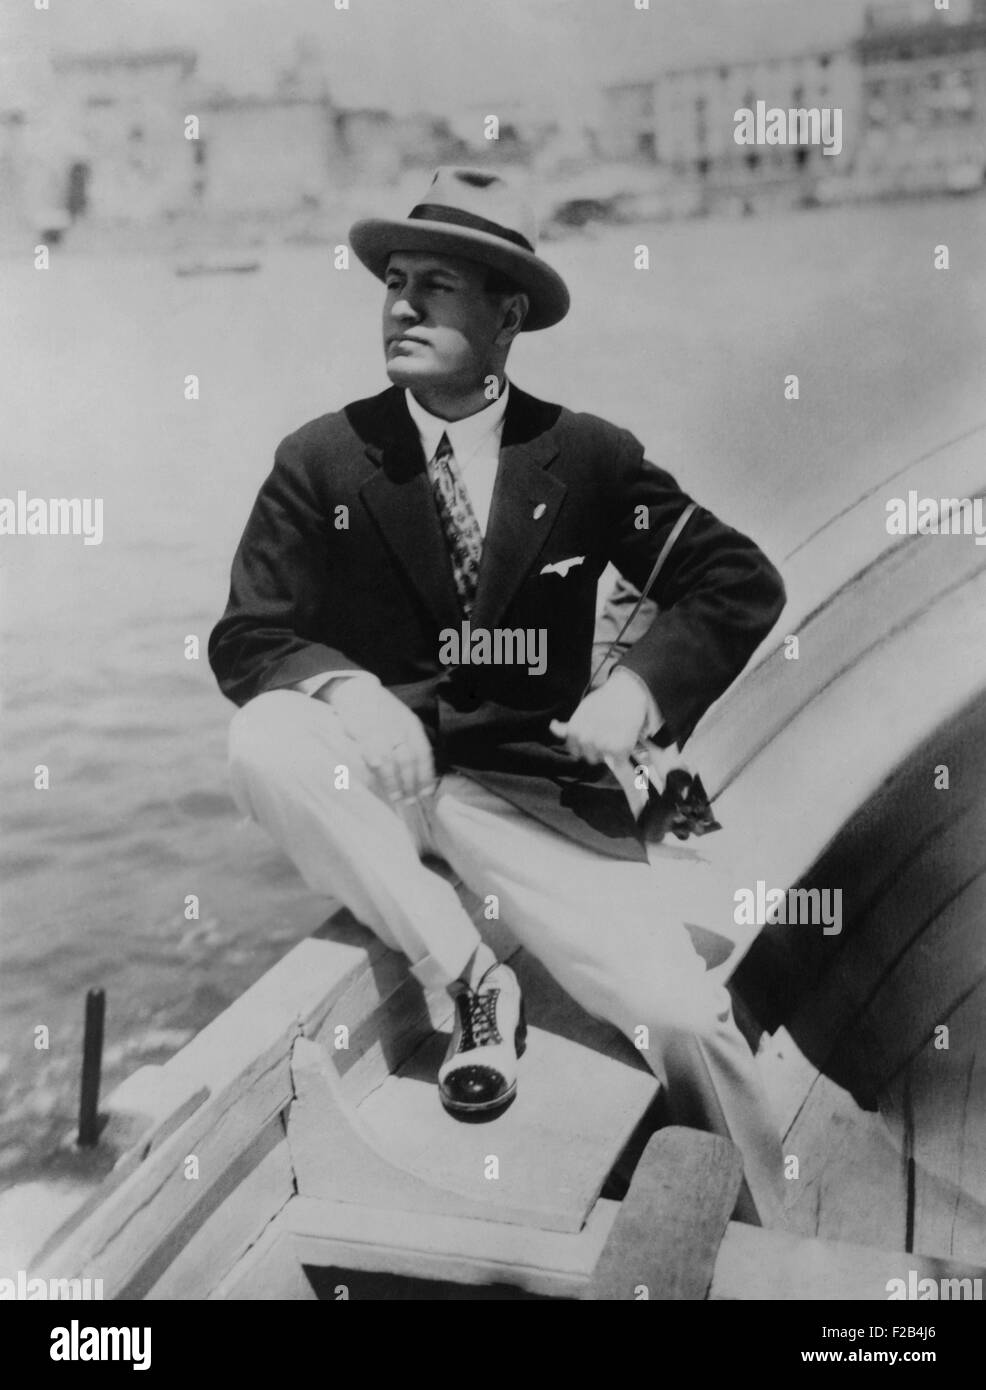 Benito Mussolini seated on boat, facing left, wearing summer suit. Ca.1915-1925. - (BSLOC 2015 1 40) Stock Photo